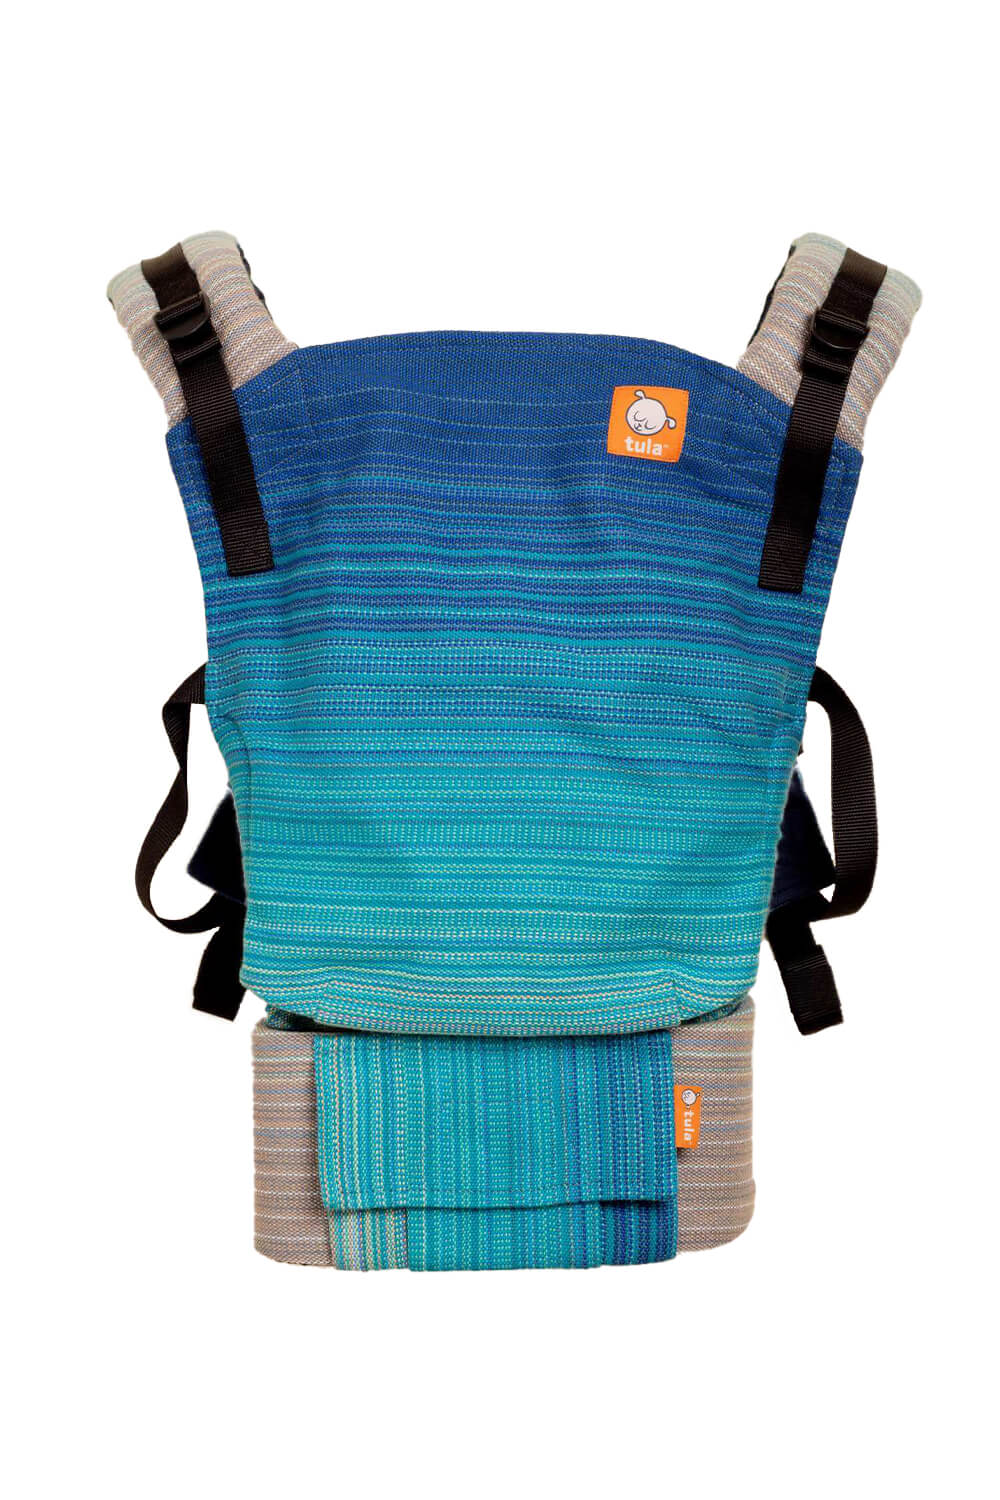 Zephyr - Signature Handwoven Free-to-Grow Baby Carrier